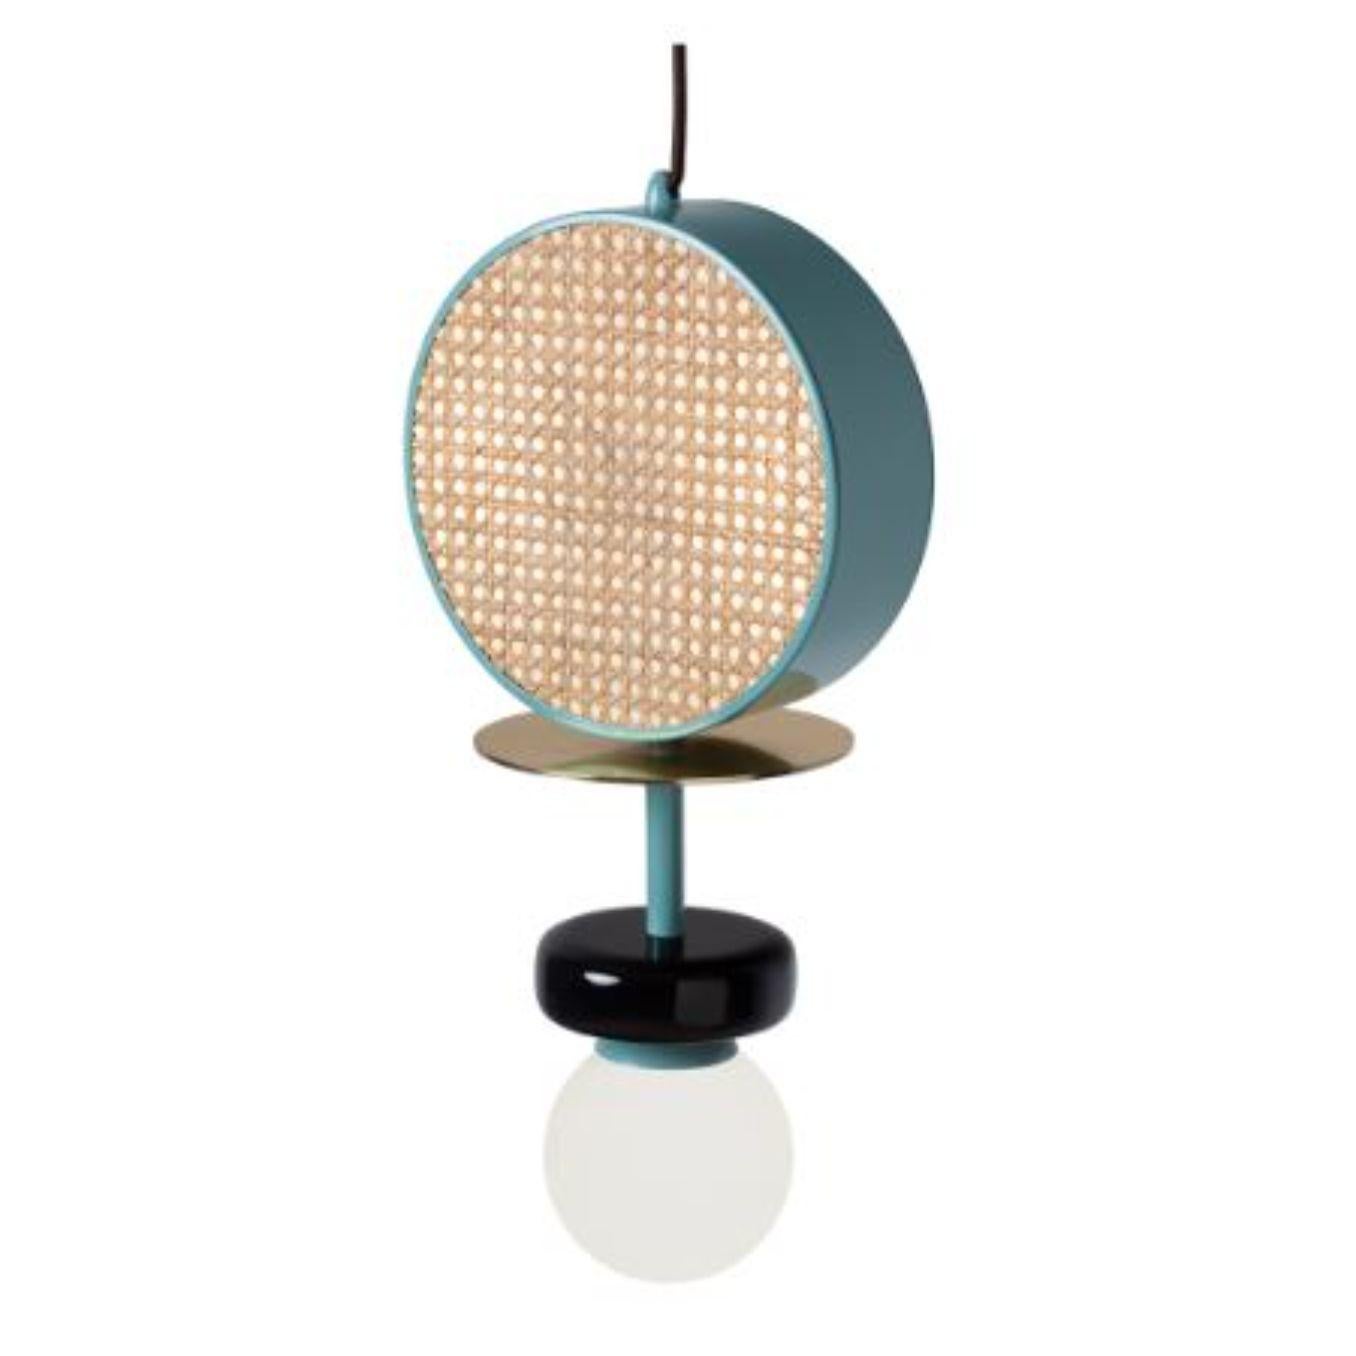 Monaco II Suspension lamp by Dooq
Dimensions: W 30 x D 15 x H 57 cm
Materials: lacquered metal, brass/nickel, rattan and wood spheres.

Information:
230V/50Hz
3 x max. G9
4W LED

120V/60Hz
3 x max. G9
4W LED

Cable: 59”/1,5m

All our